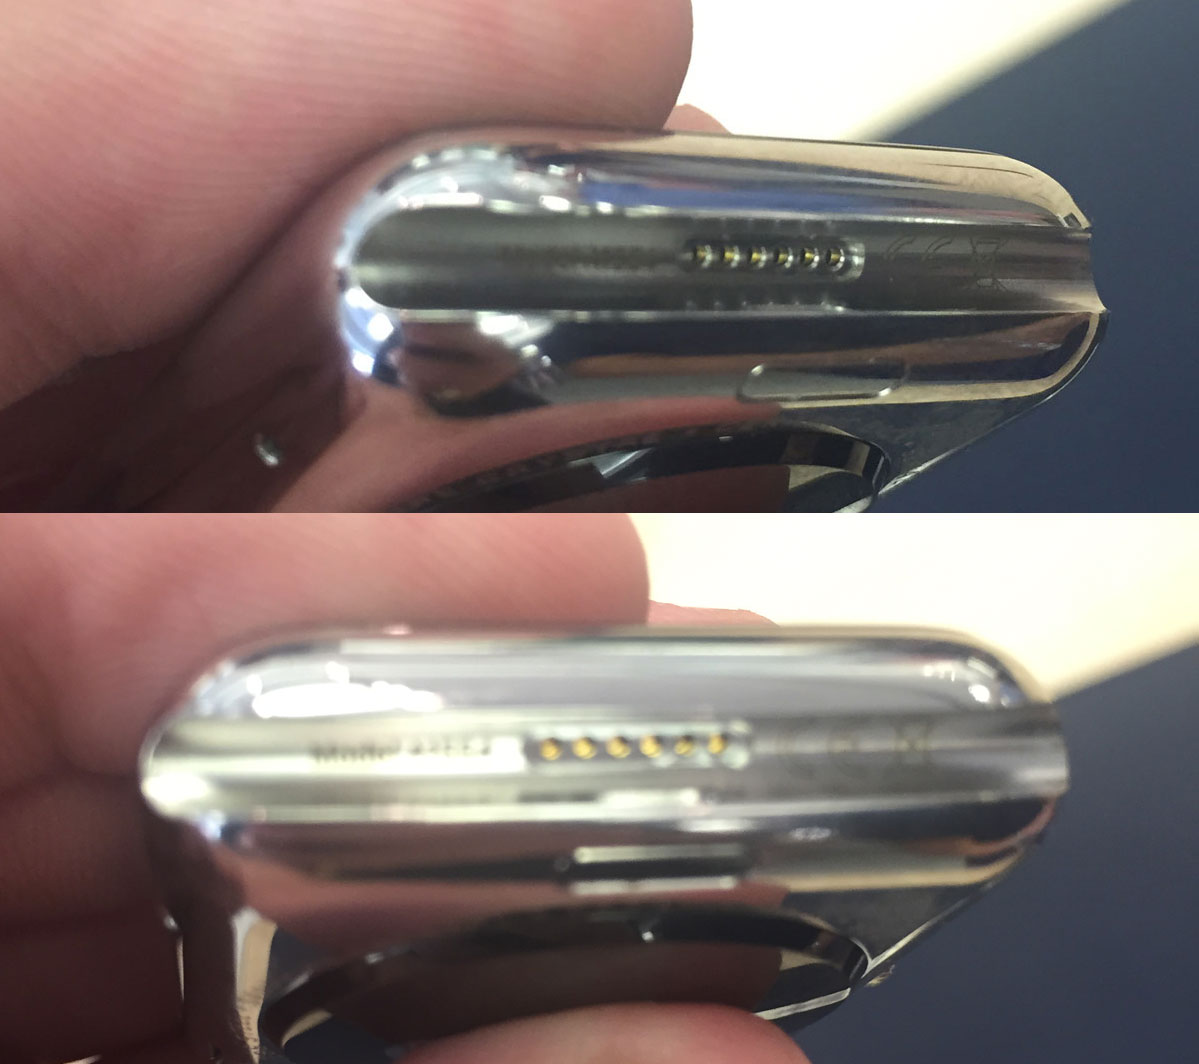 It&#039;s Faster to Charge the Apple Watch Using the 6-Pin Accessory Port [Video]